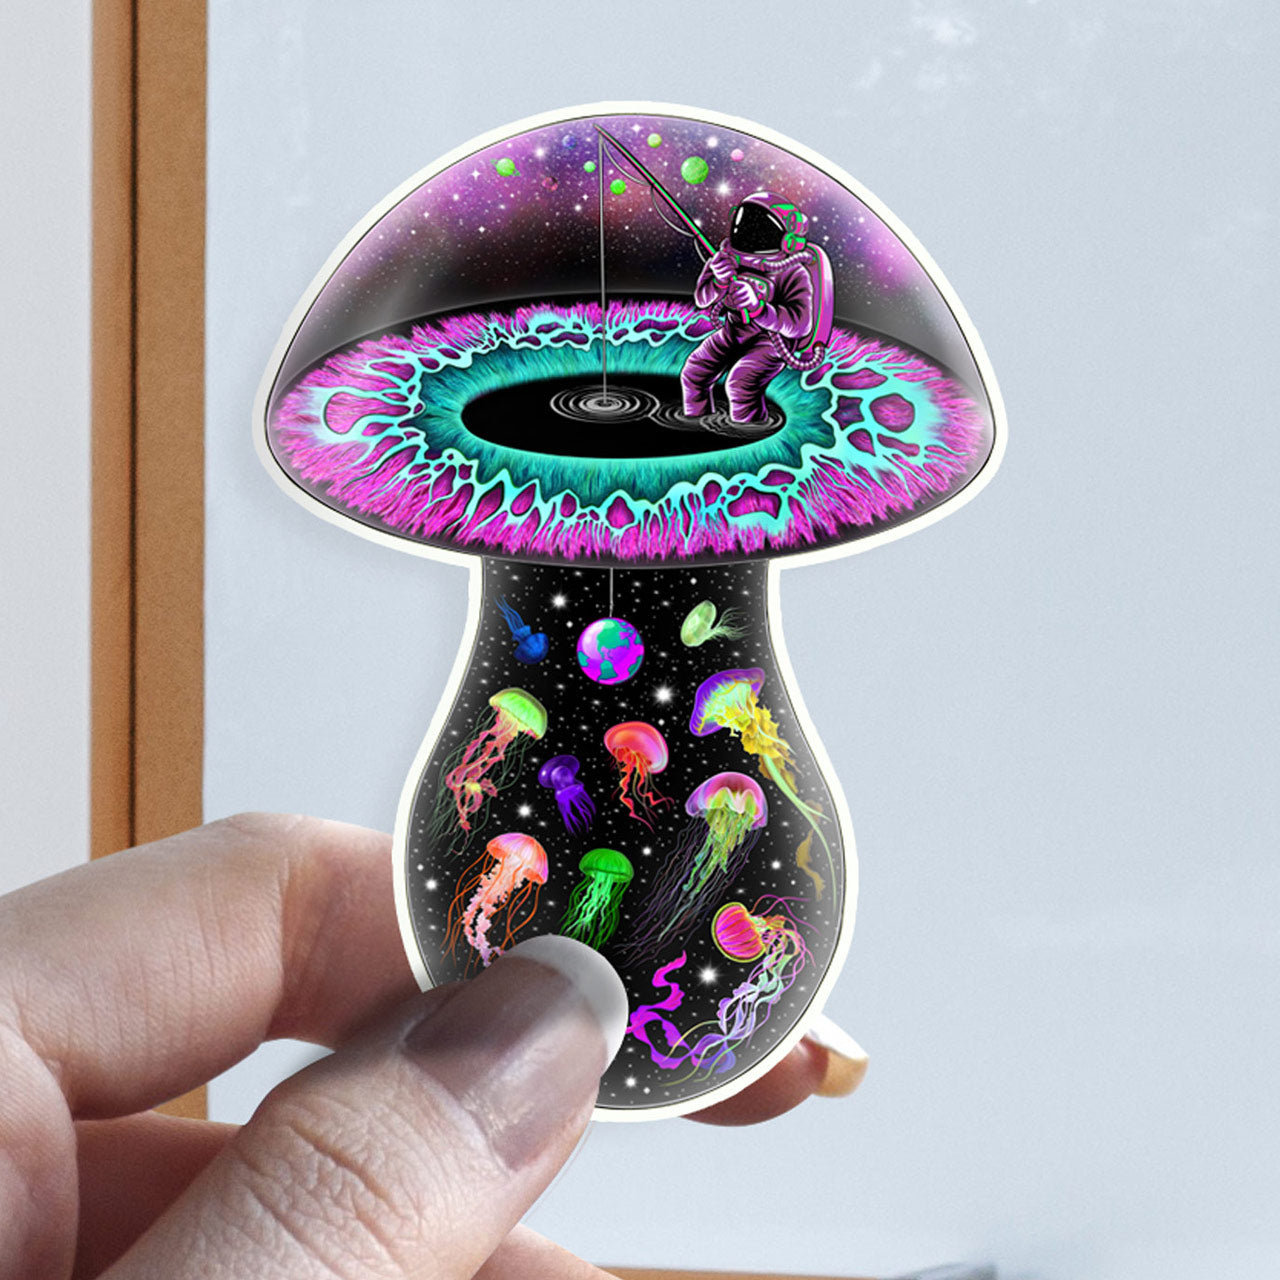 Tripping on Space Mushrooms |Shroomaniac| Psychedelic and Psytrance Mushroom Stickers